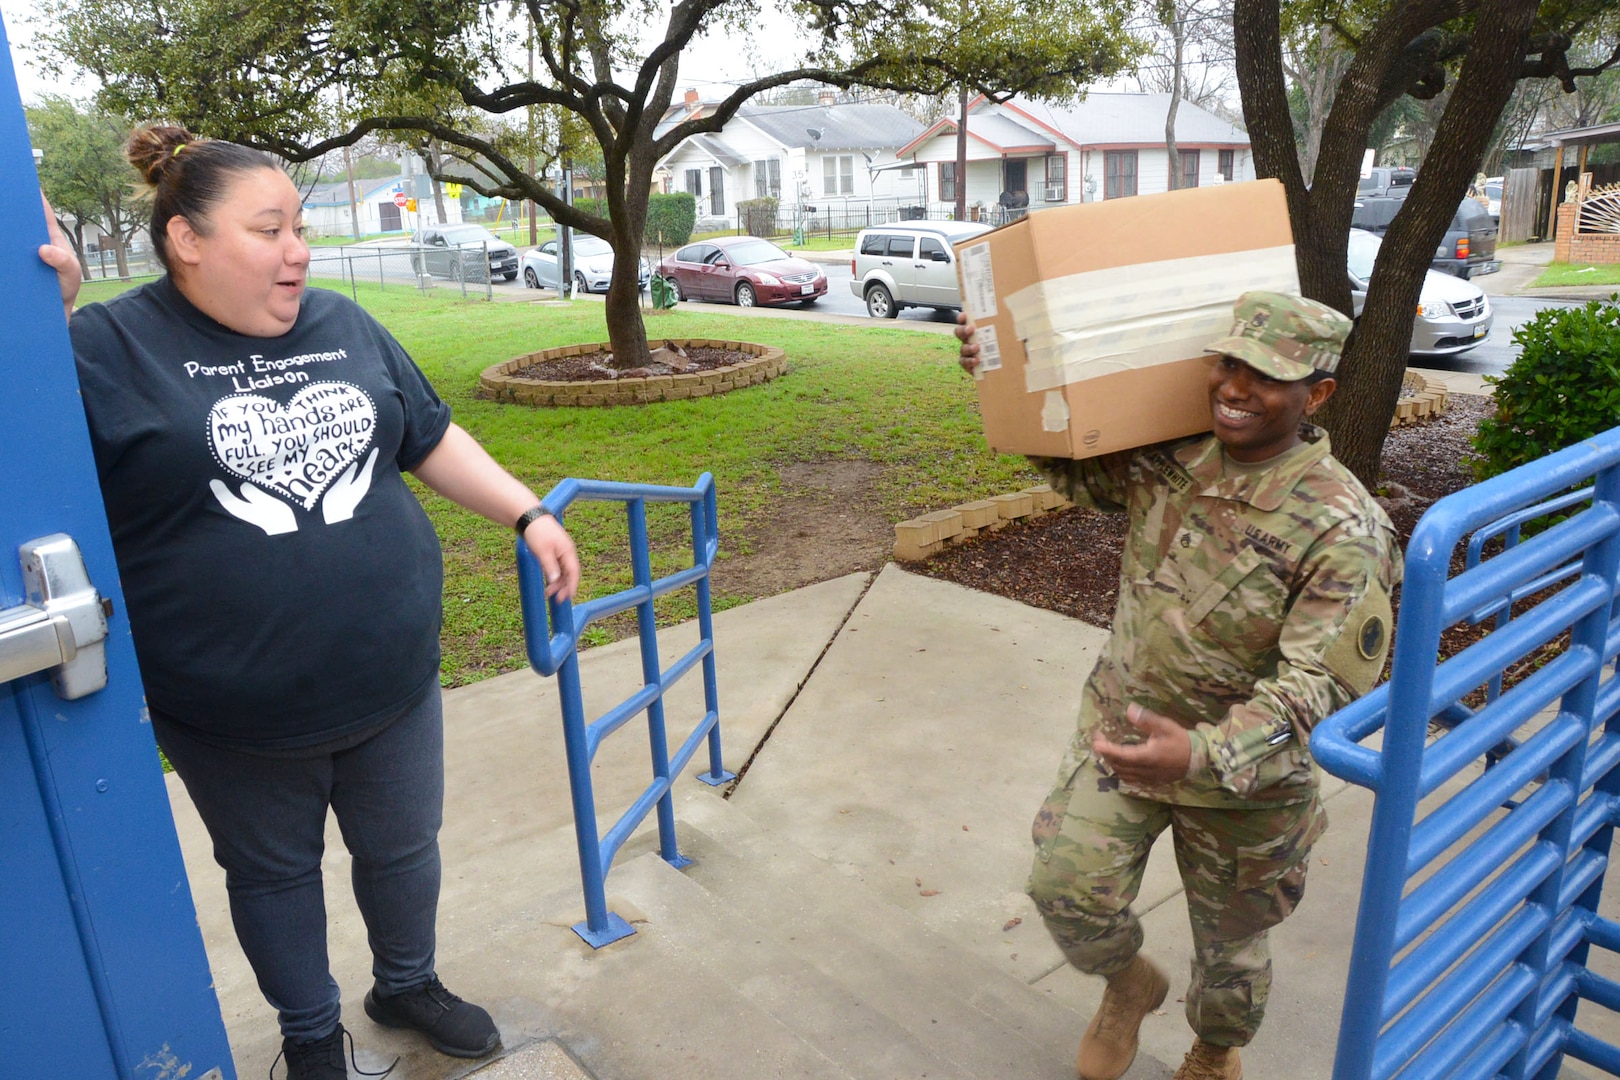 Staff Sgt. Darrell Applewhite (right), Headquarters and Headquarters Battalion, U.S. Army South, is greeted by Julia Losoya, the Parent and Family Liaison atBooker T. Washington Elementary School, as he carries in one of many boxes of winter coats into the school Feb. 22. The school and unit are partnered through the Adopt-a-School program. Units on Fort Sam Houston are partnered with schools with the Northeast Independent School District, the San Antonio Independent School District and the Fort Sam Houston Independent School District.